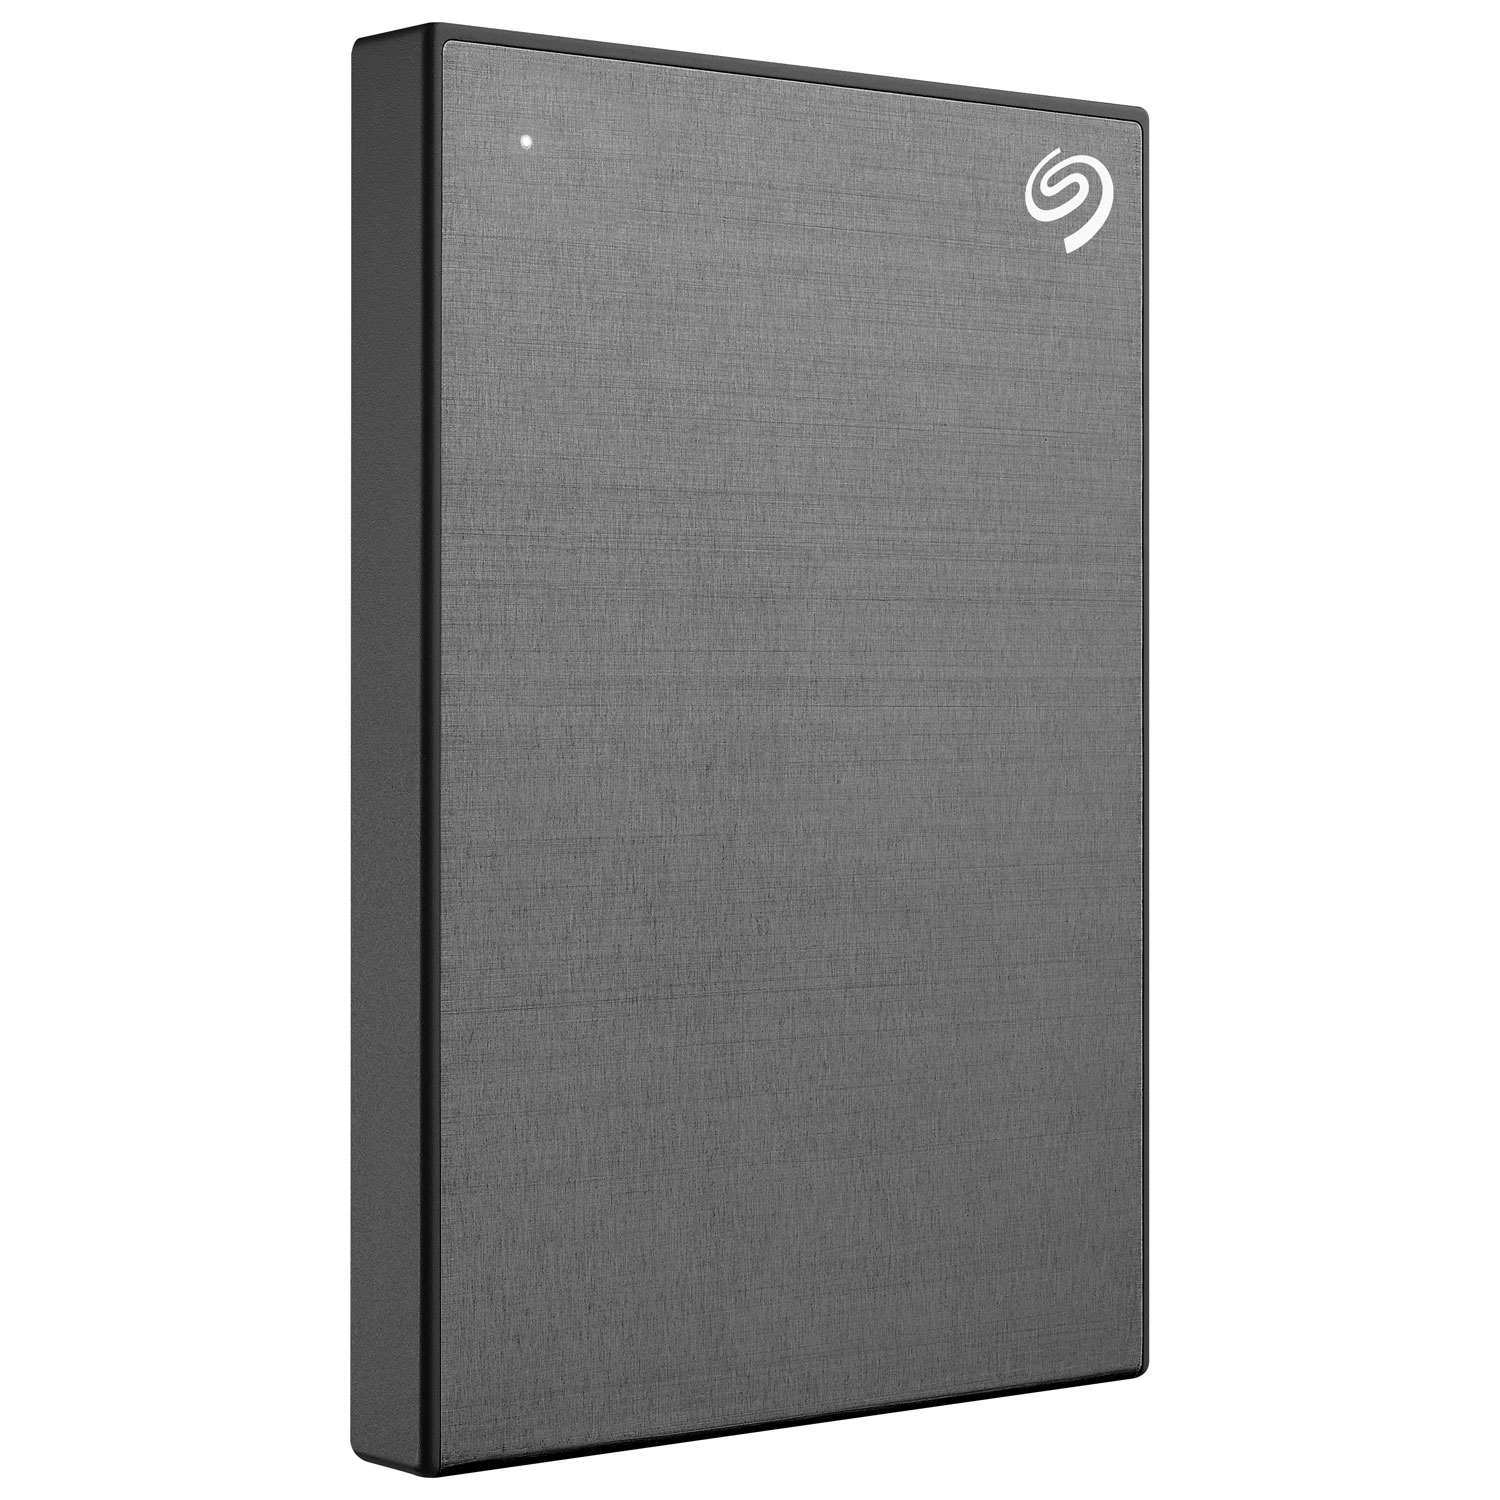 Seagate One Touch 2TB USB 3.0 Portable External Hard Drive